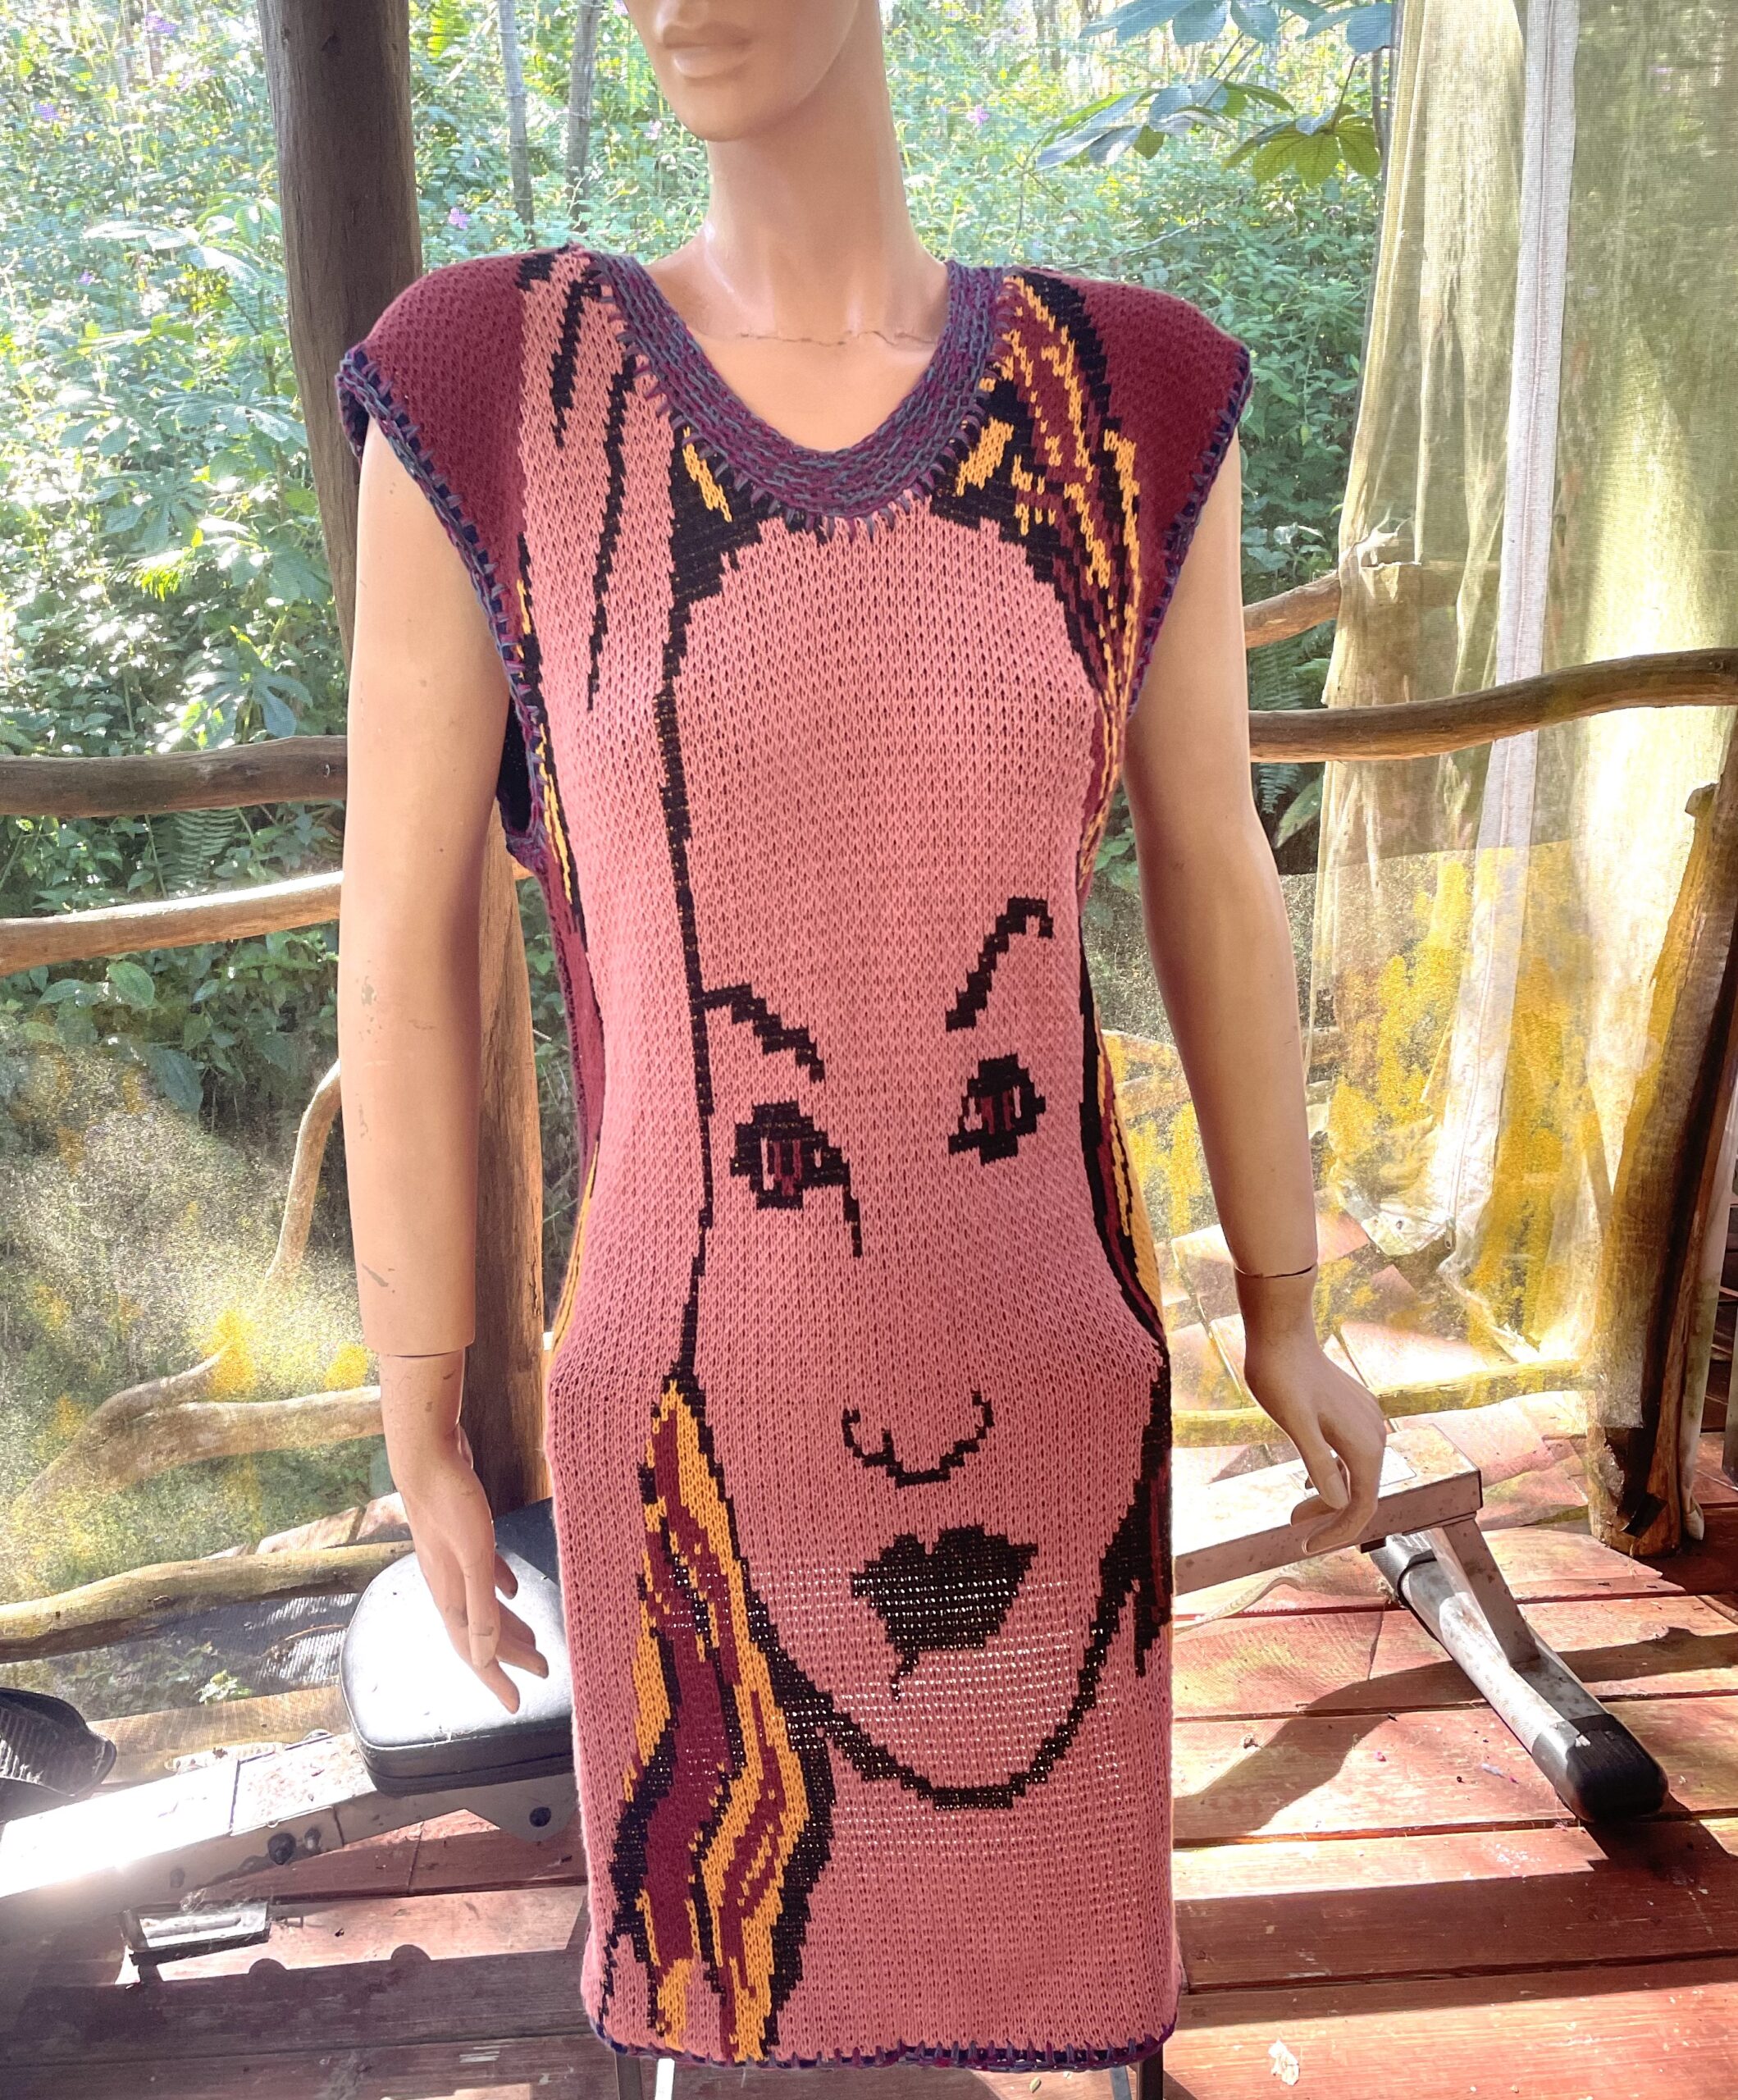 A mannequin wearing a dress with a woman's face on it.